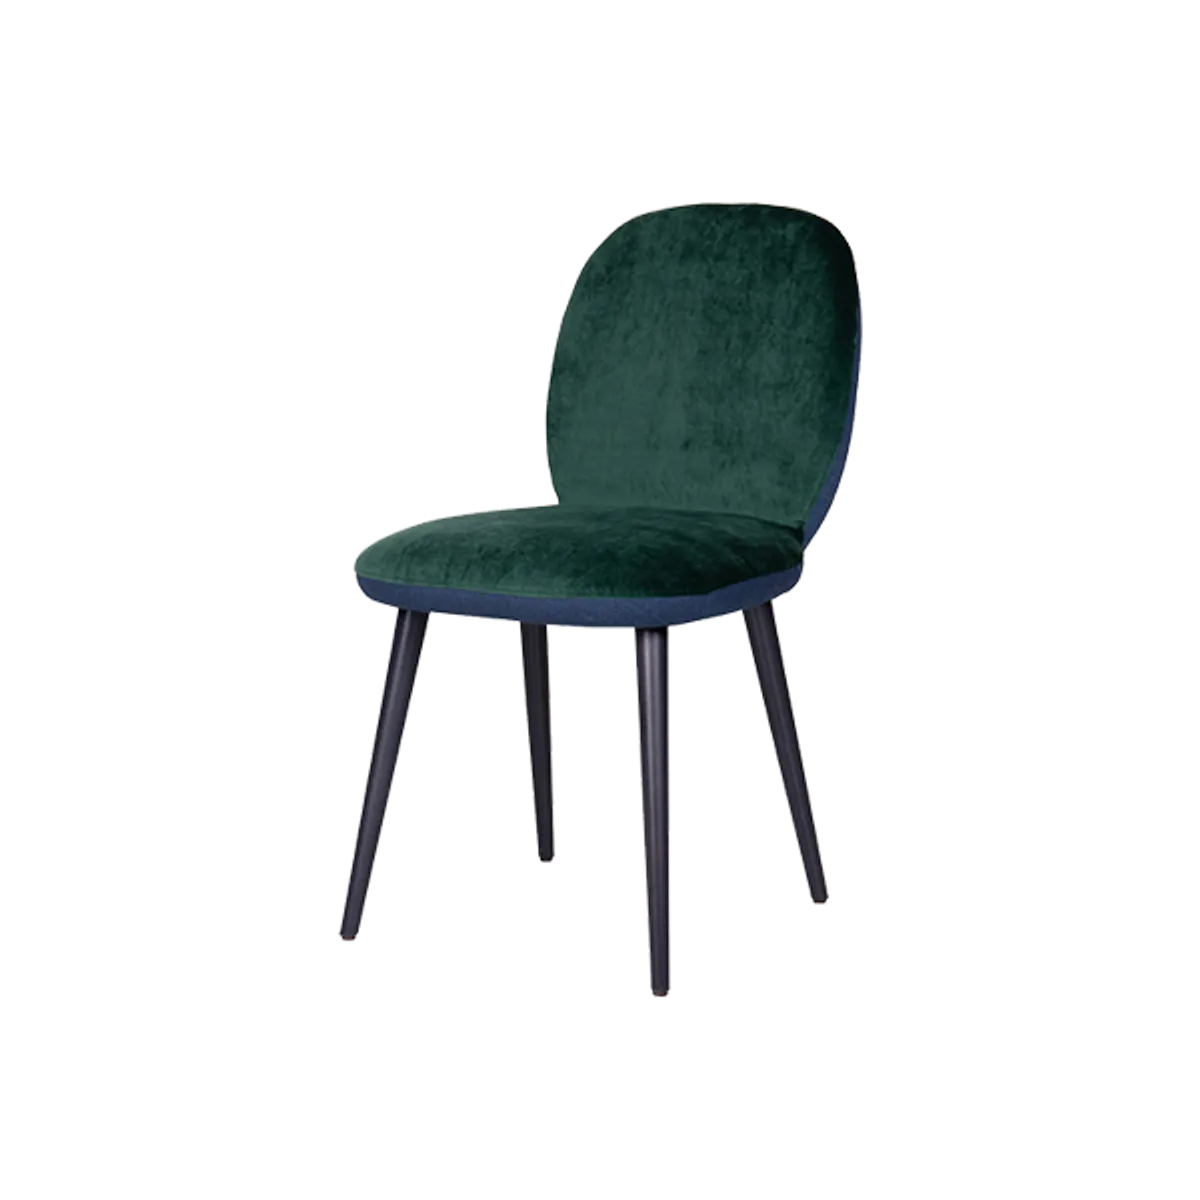 Bombomsidechair Inside Out Contracts2